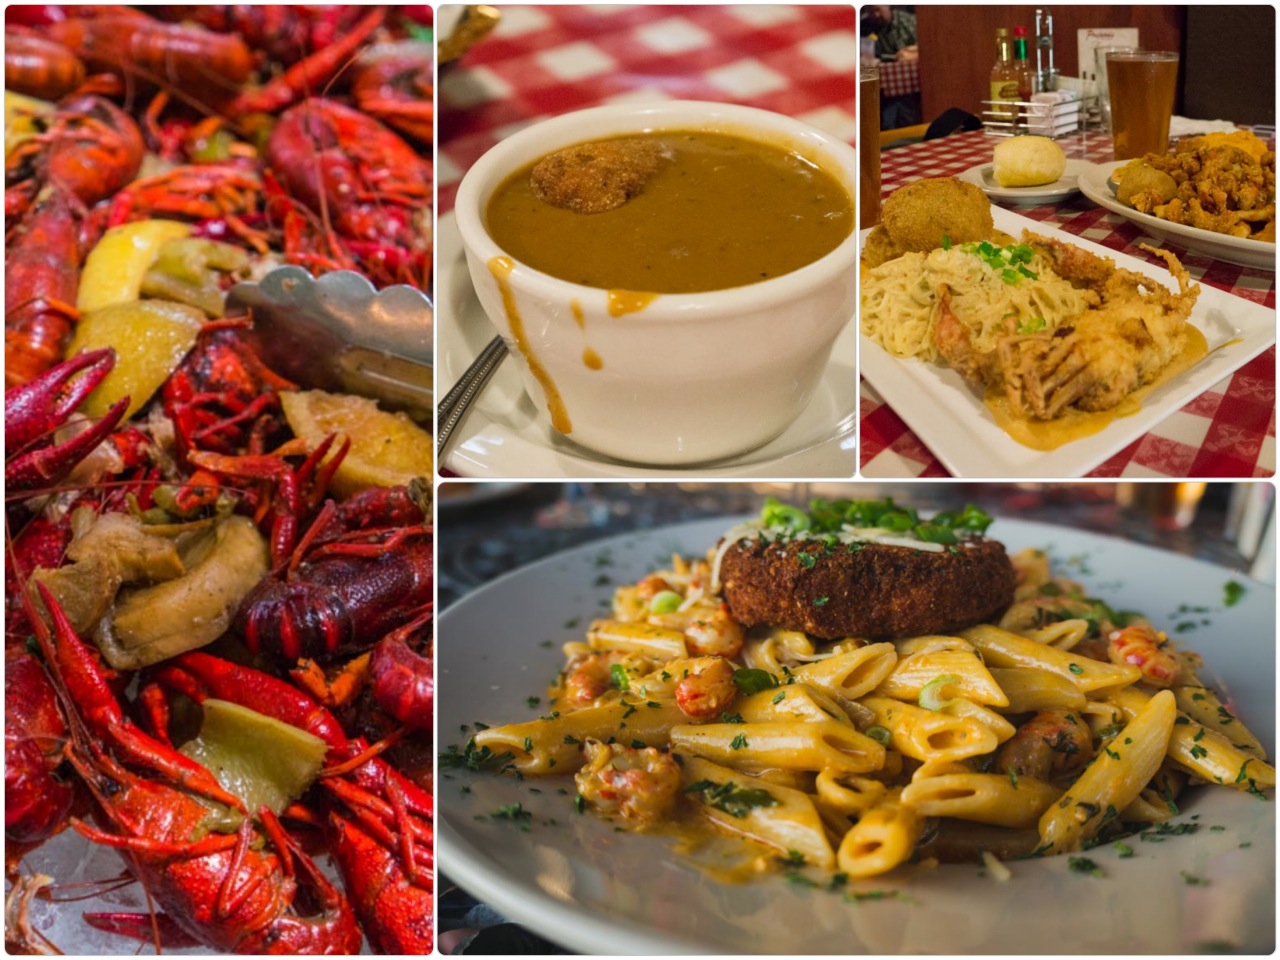 Louisiana Cuisine - Breaking Down Preconceived Notions